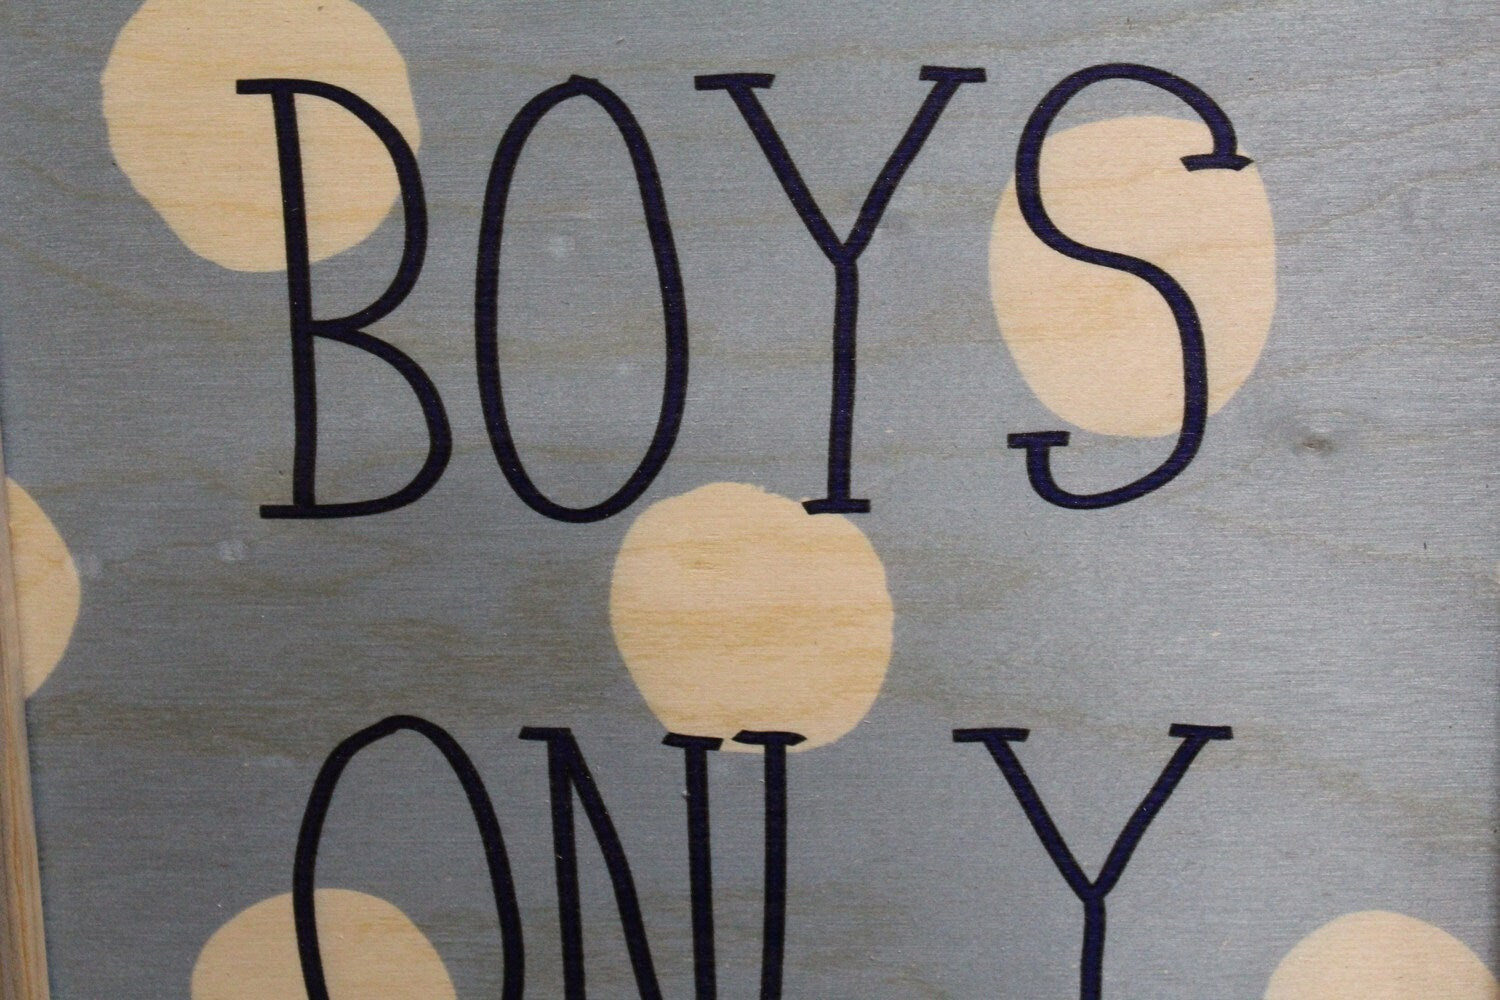 Framed Boys Only Wood Sign Room Sign Pallet Sign Club House Blue and White Circles No Girls Text Script Décor Decoration Print Wall Art